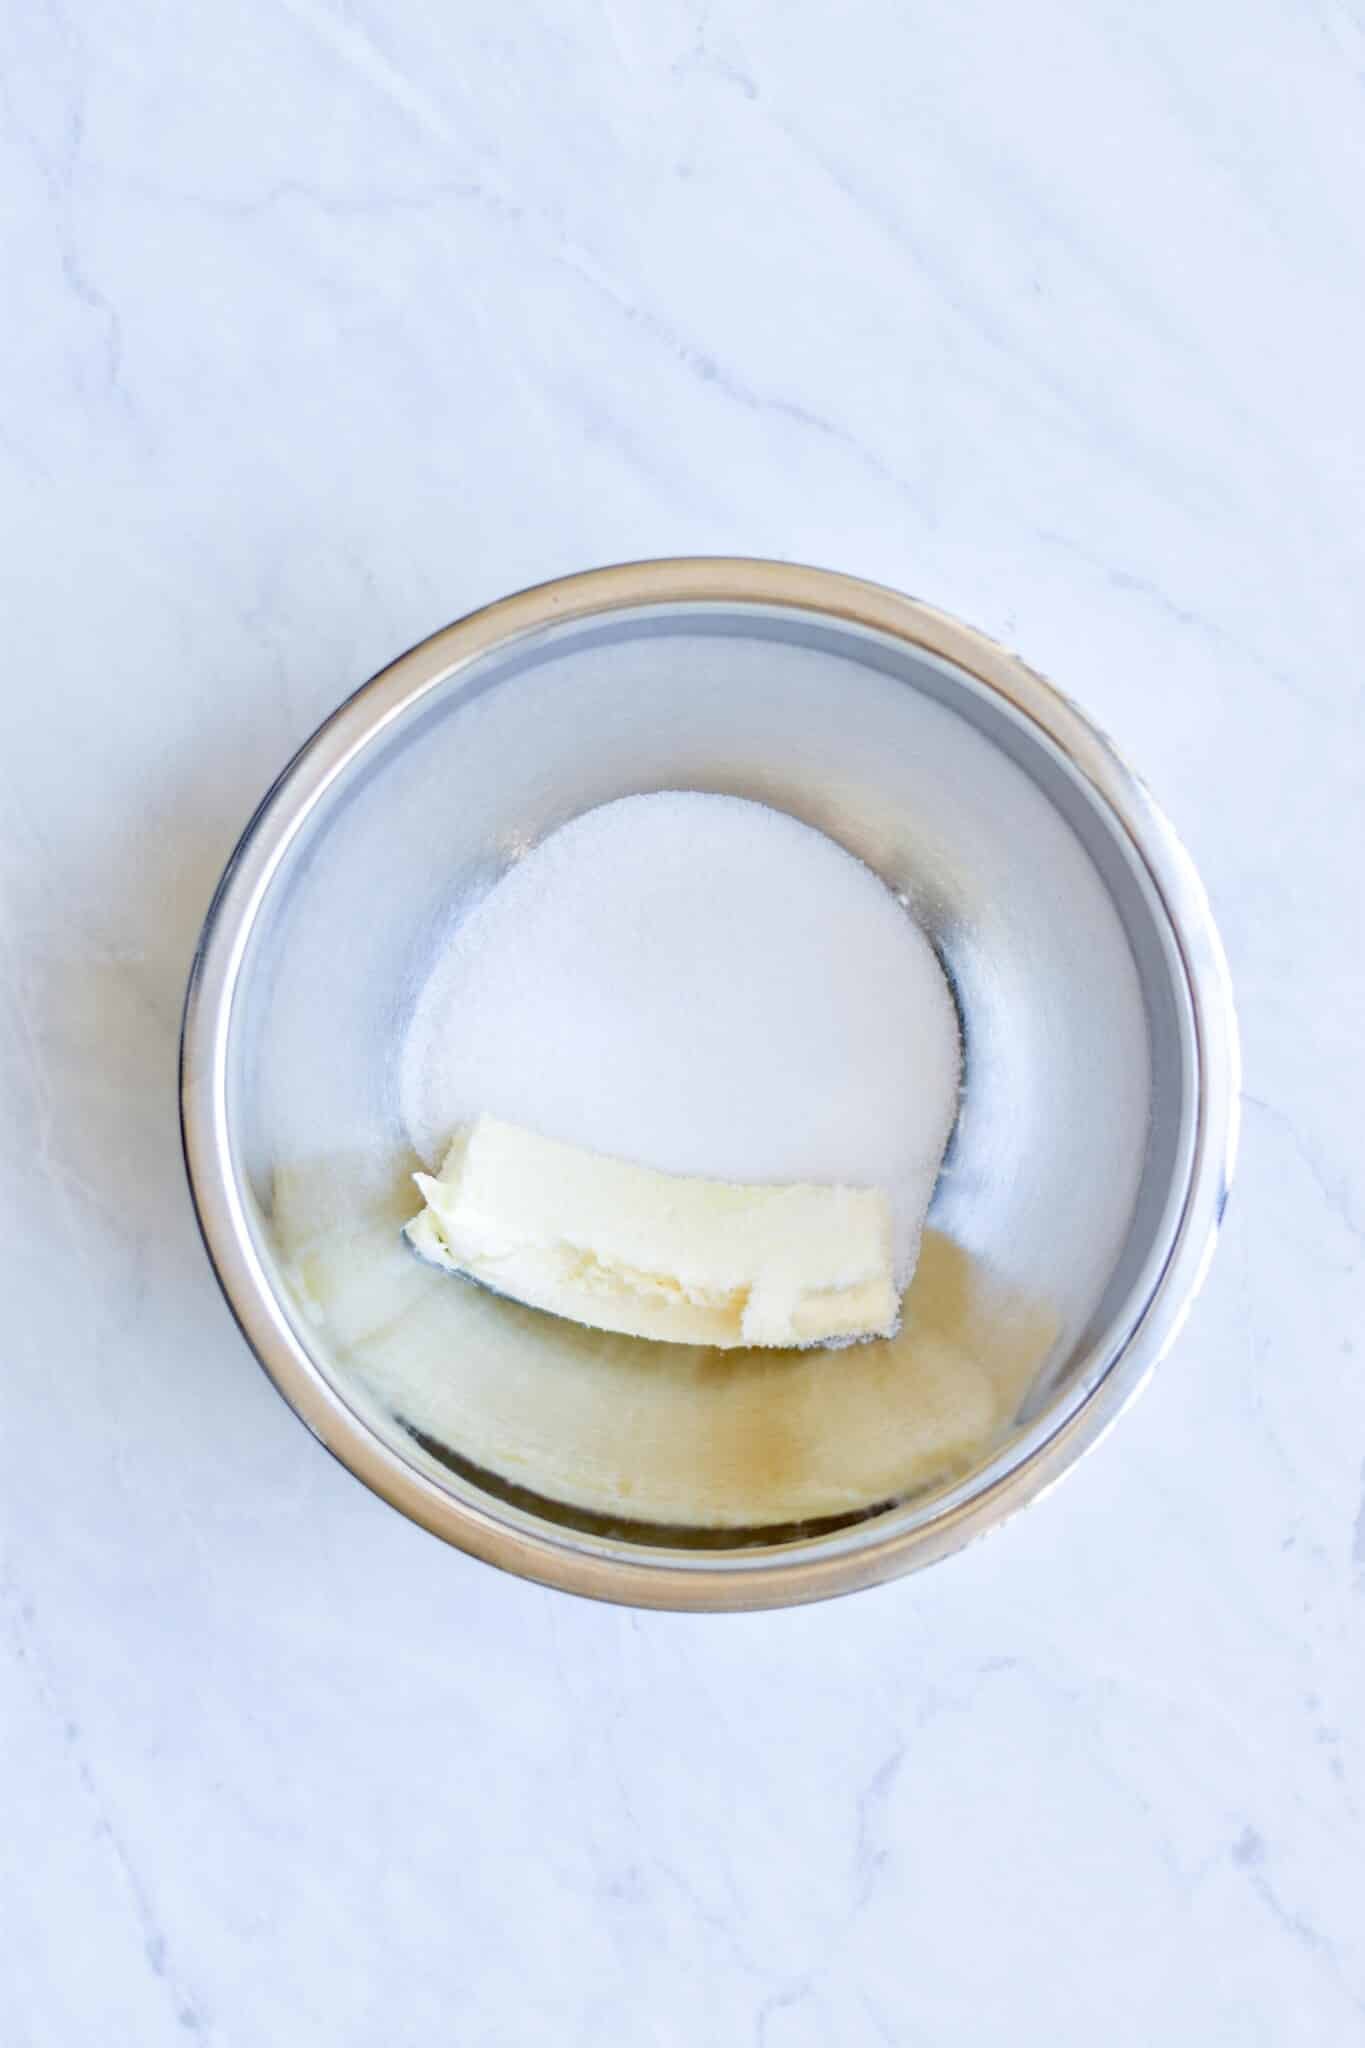 metal bowl on a marble surface filled with a stick of softened butter and sugar